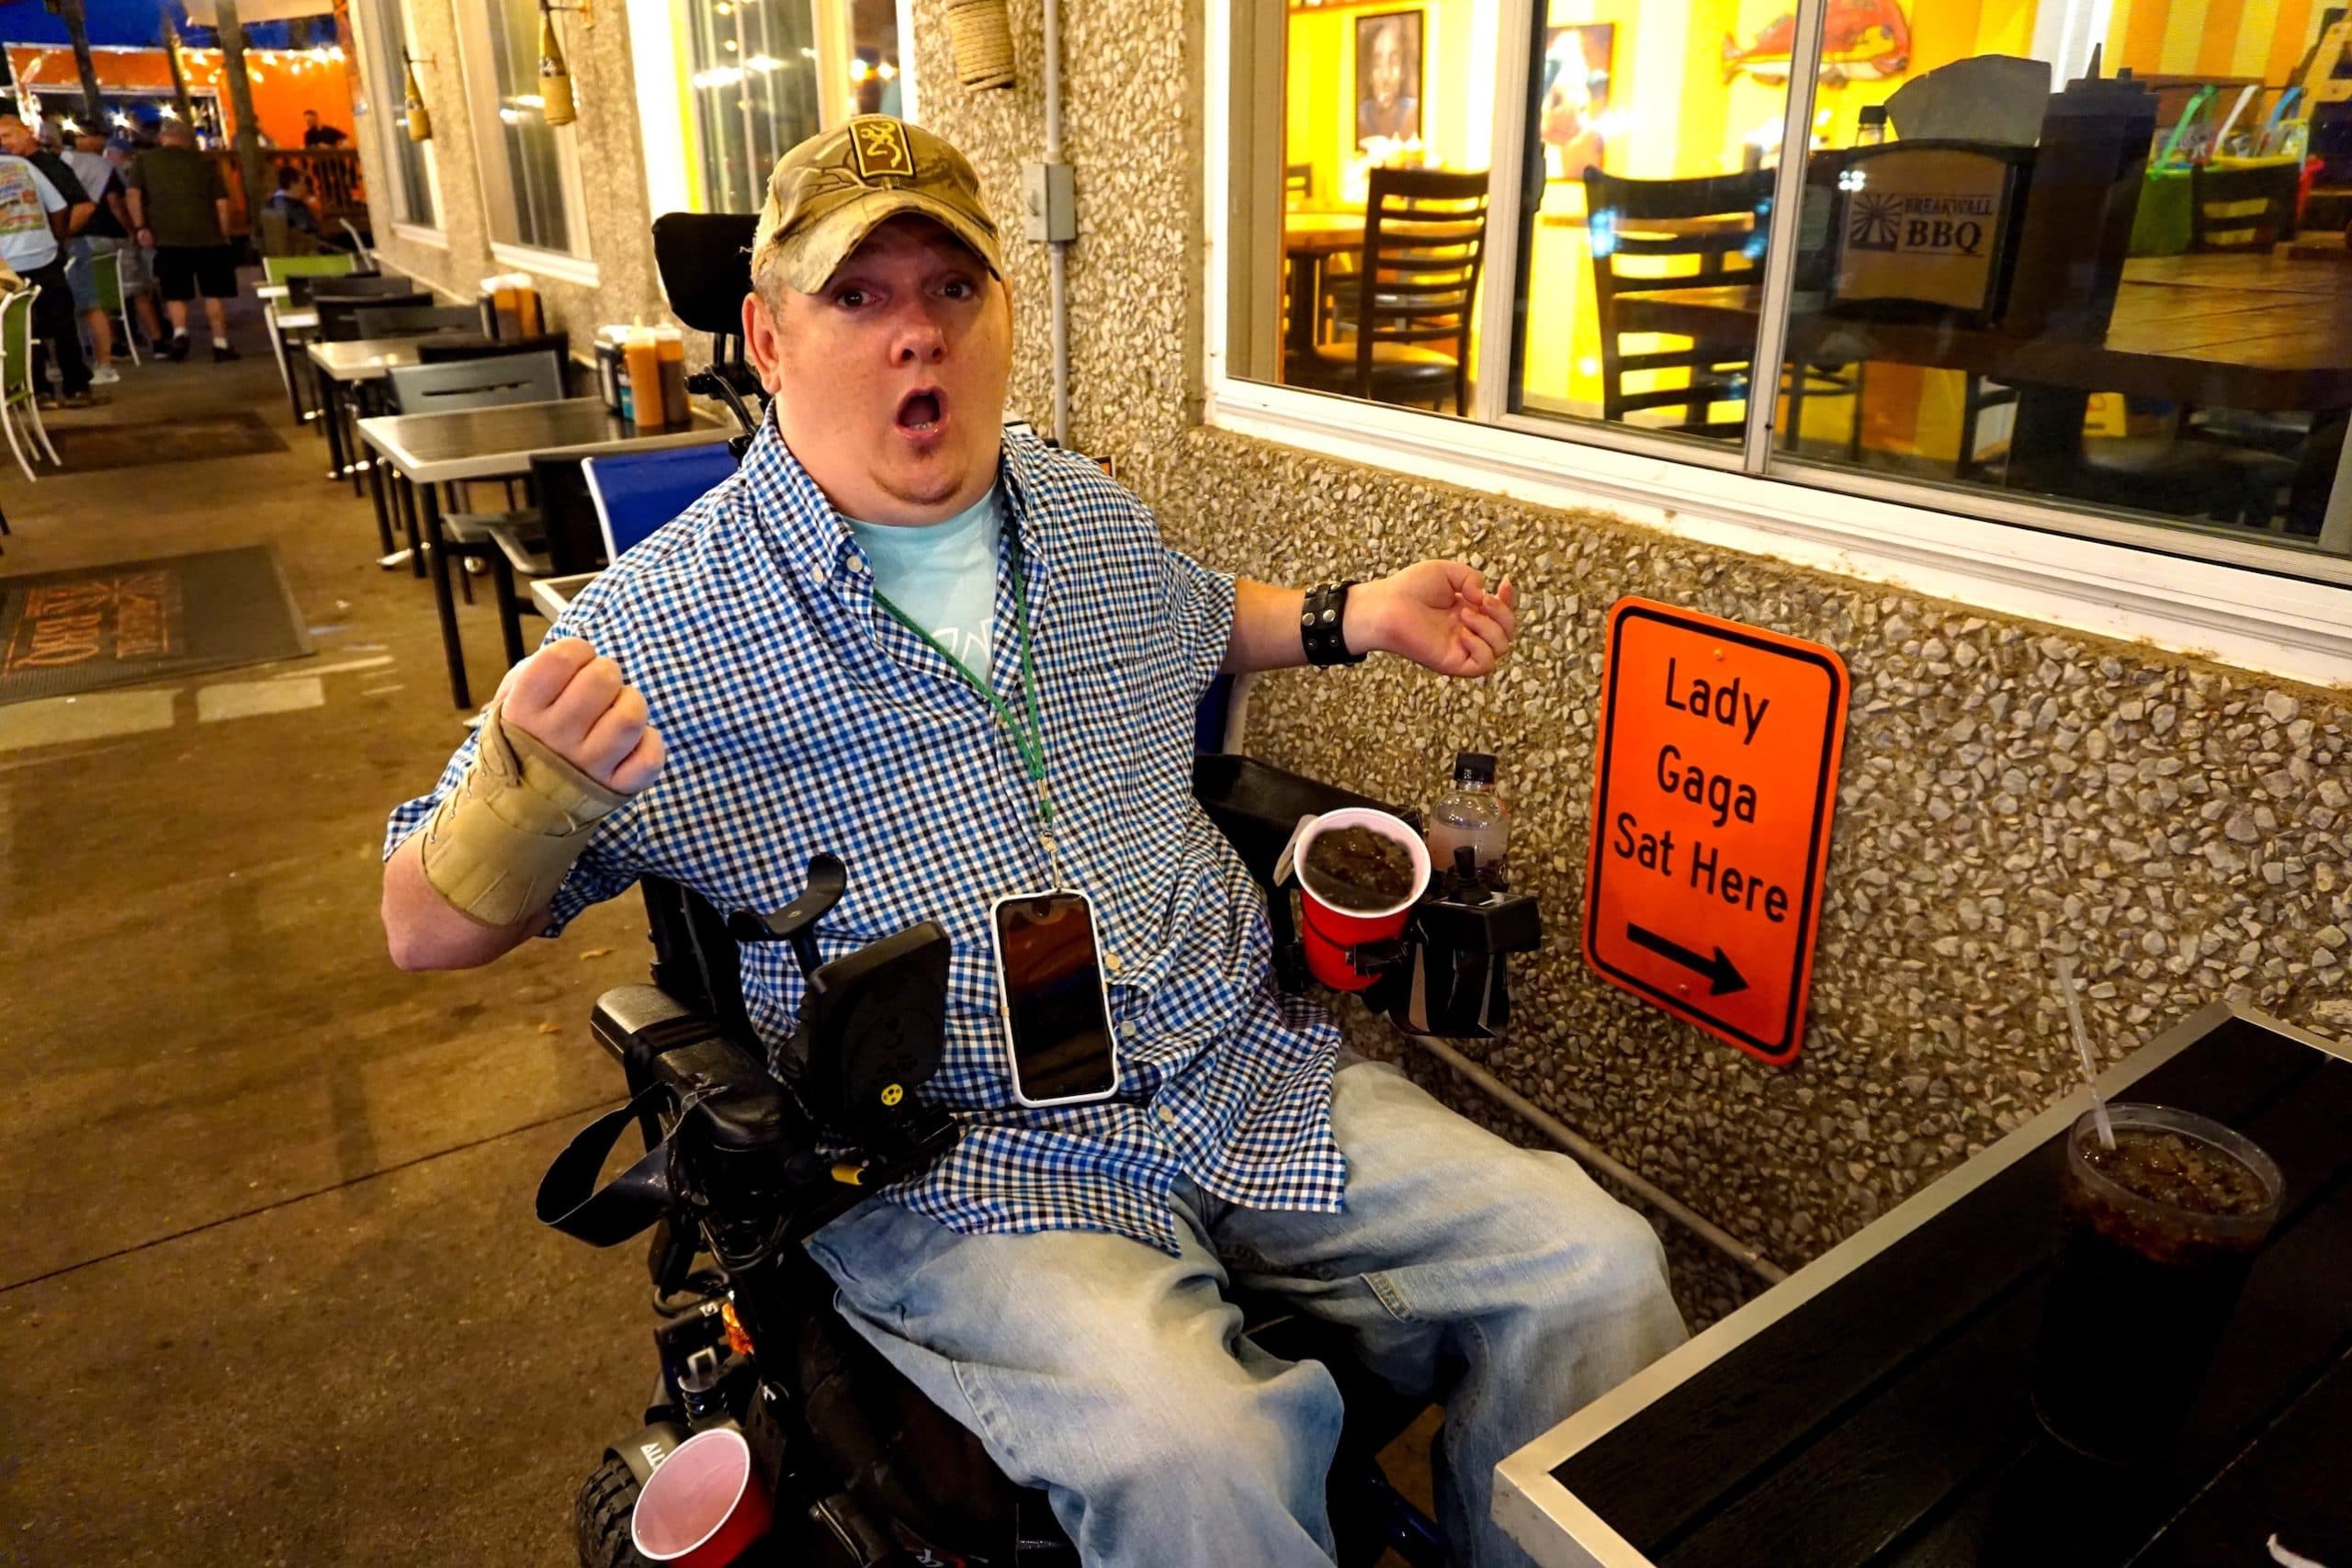 Tim sits at an outdoor table at a restaurant. The sign at his table reads "Lady Gaga sat here."